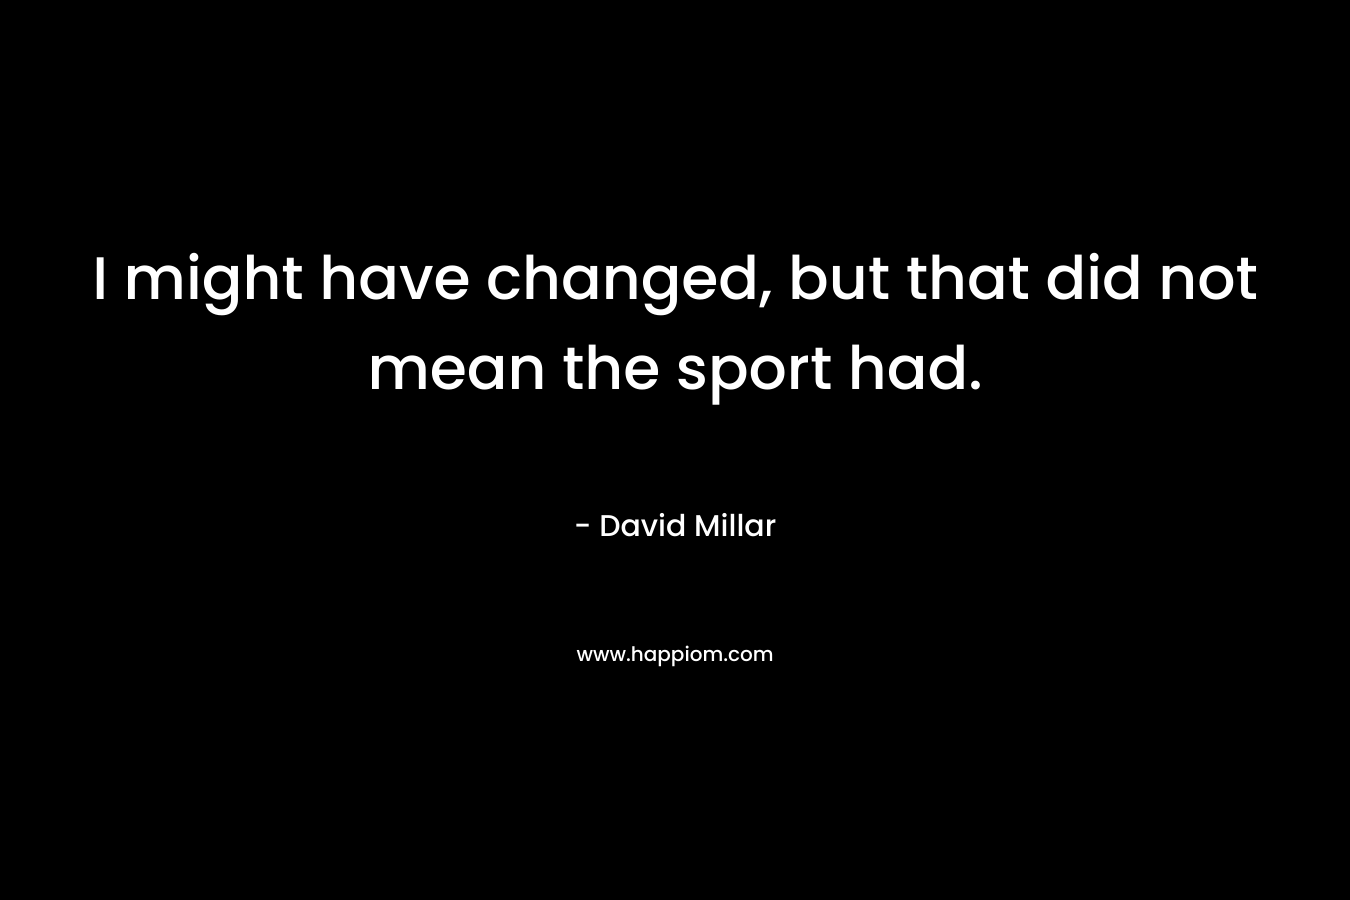 I might have changed, but that did not mean the sport had. – David Millar